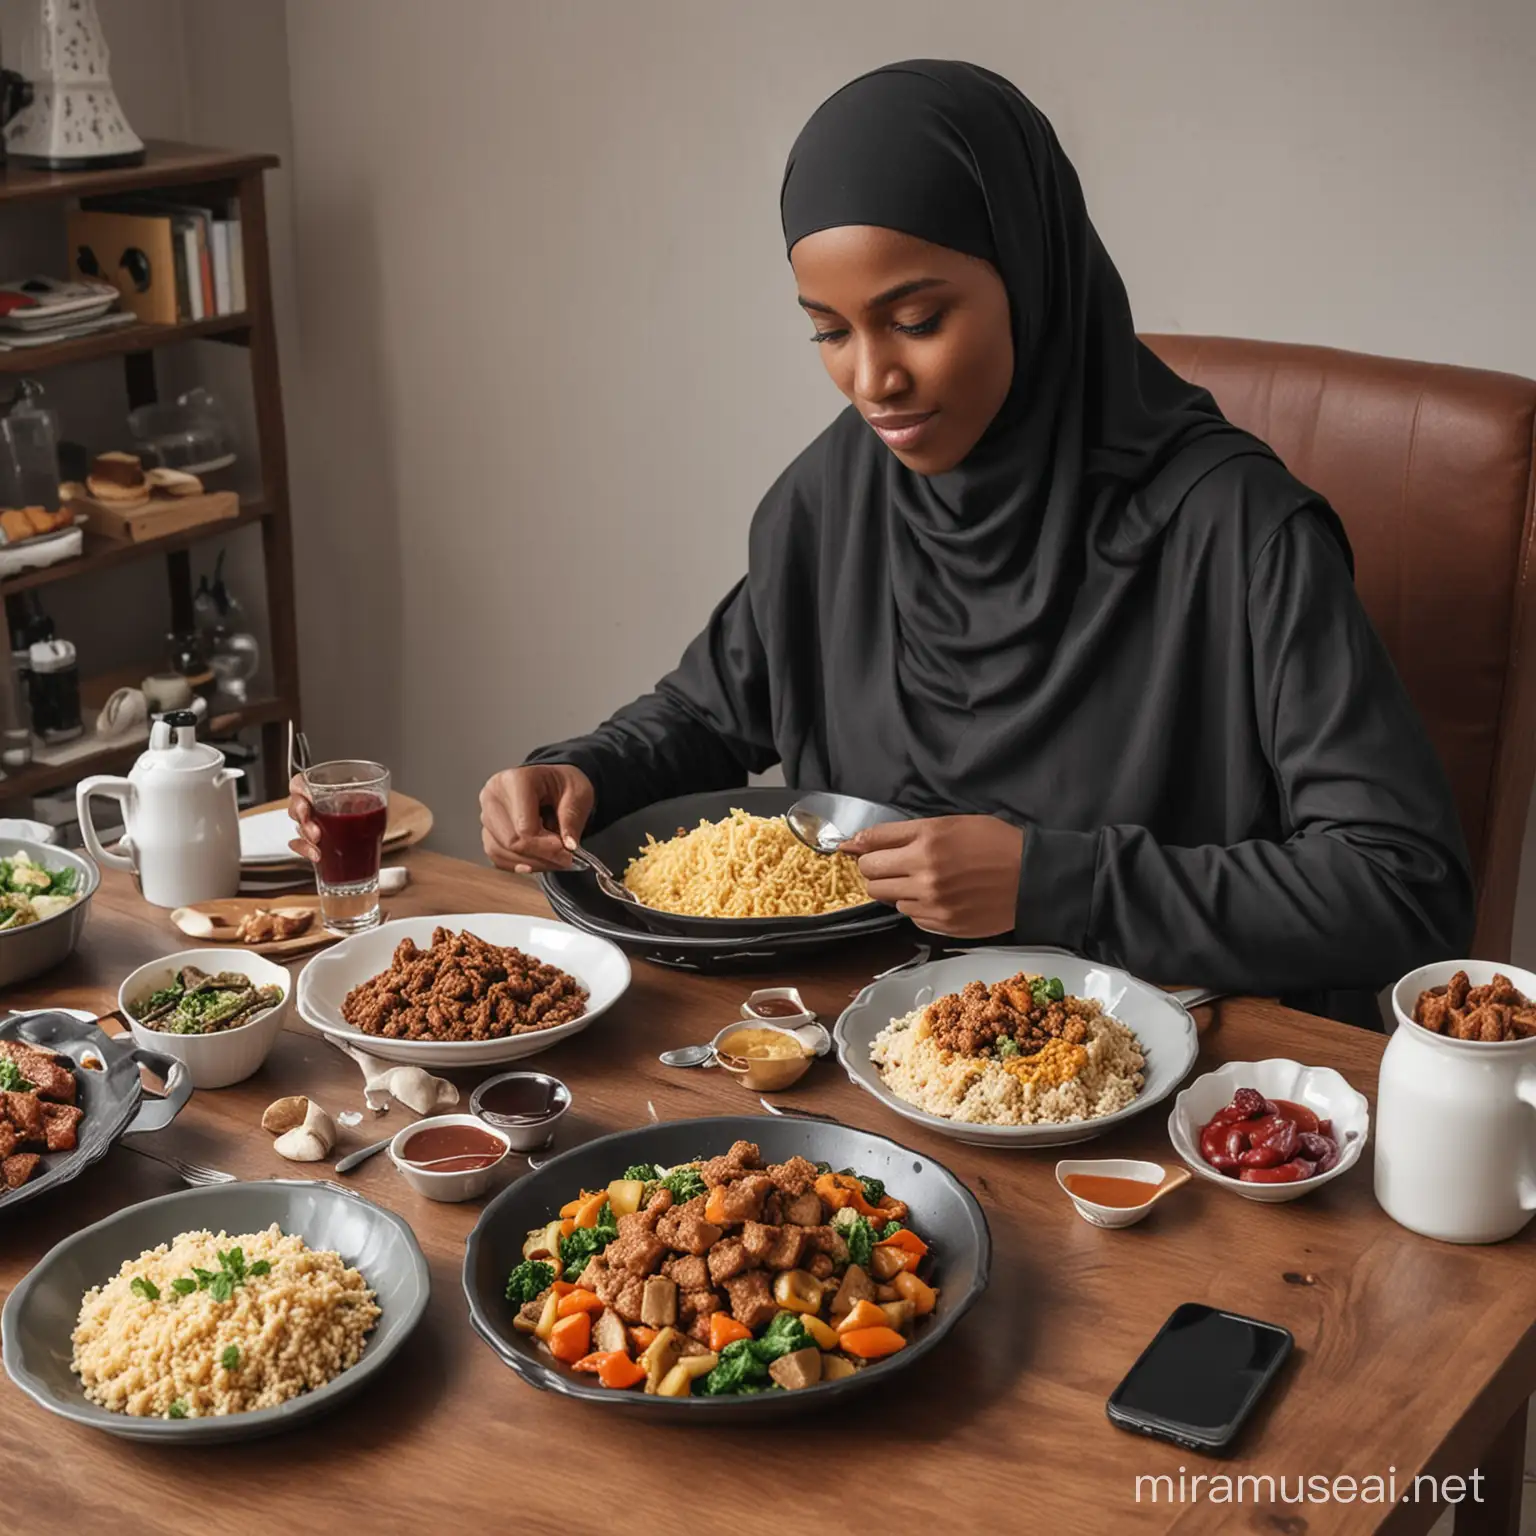 BLACK MUSLIM EATING MEAL, WITH GADGETS ON THE TABLE
